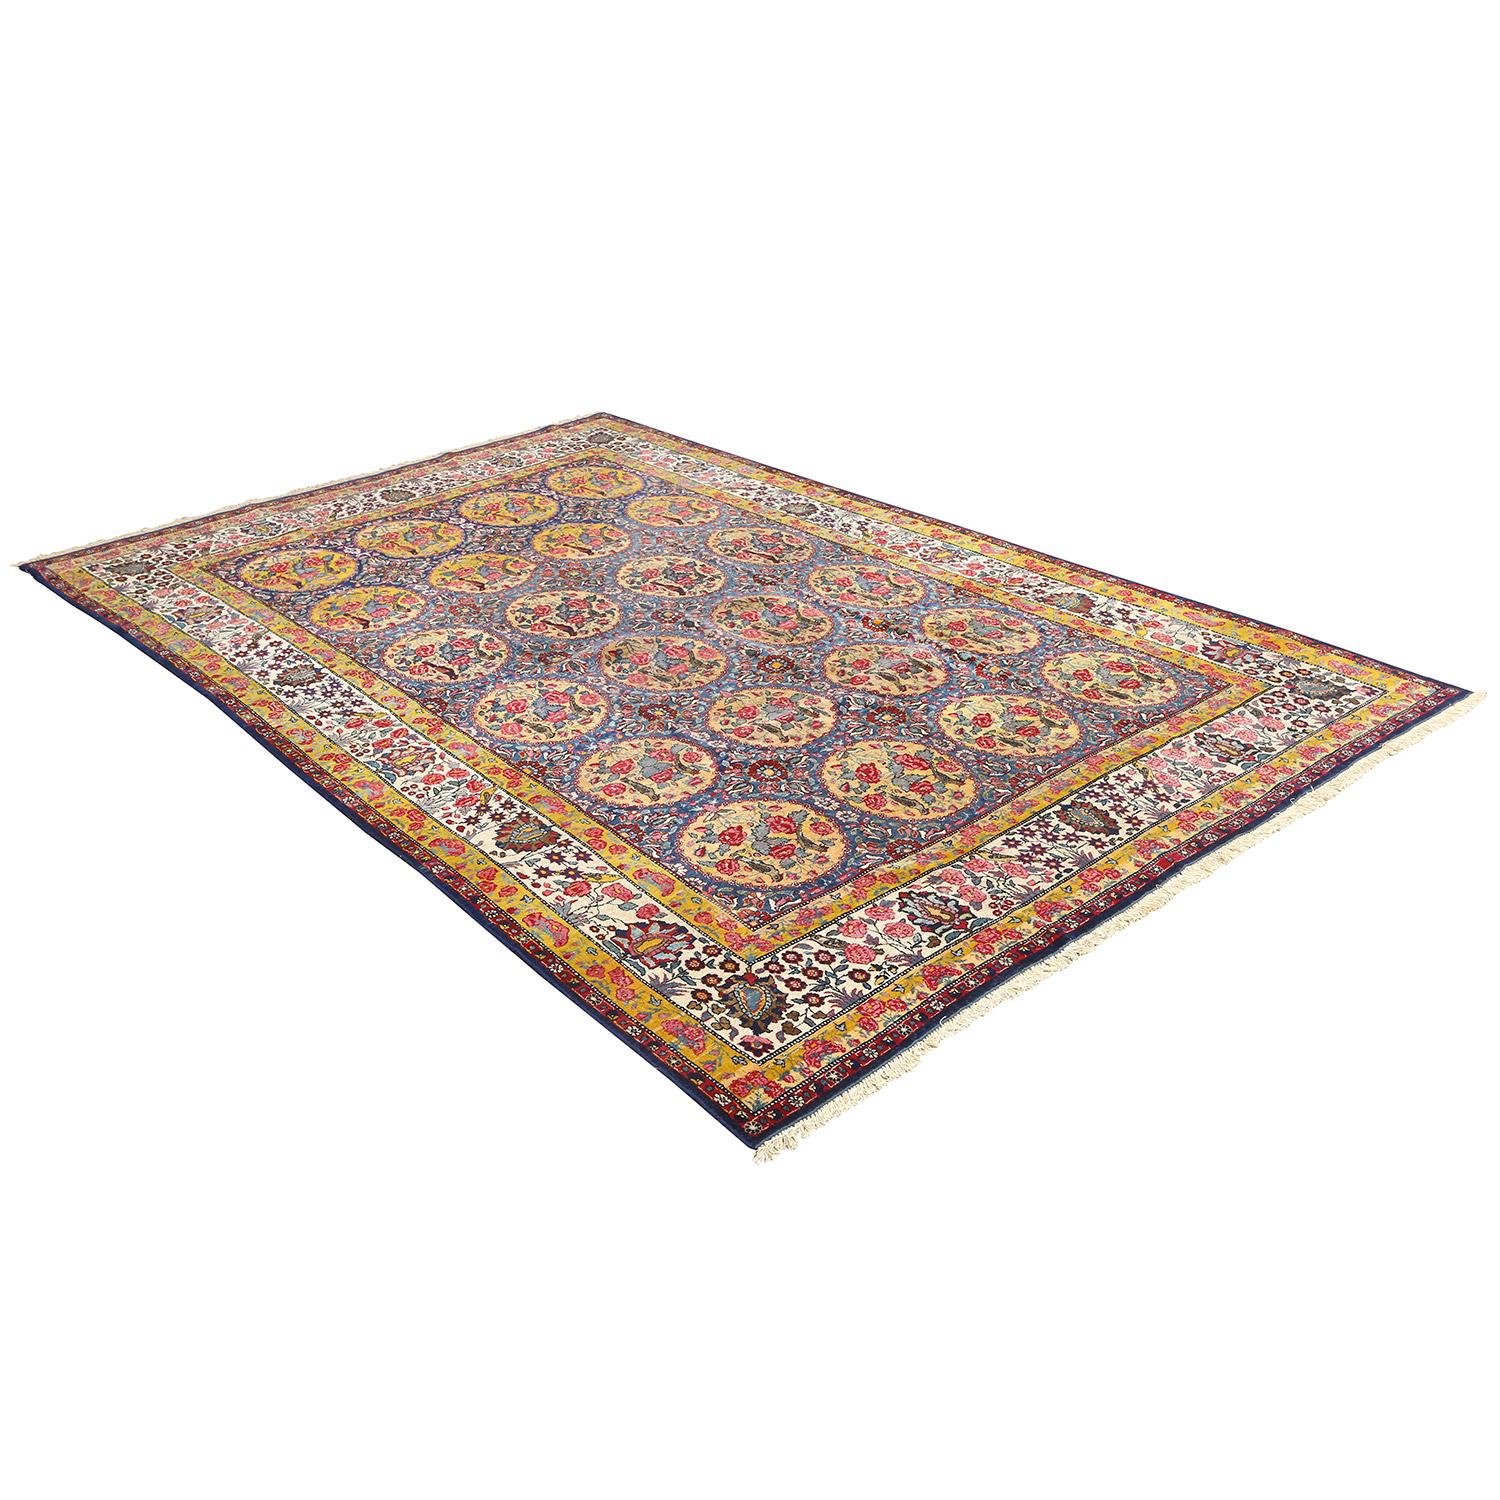 This Tehran rug is a masterpiece that encapsulates centuries of Persian craftsmanship and artistic heritage. Meticulously woven by skilled artisans in the bustling city of Tehran, these rugs are more than just floor coverings; they are exquisite